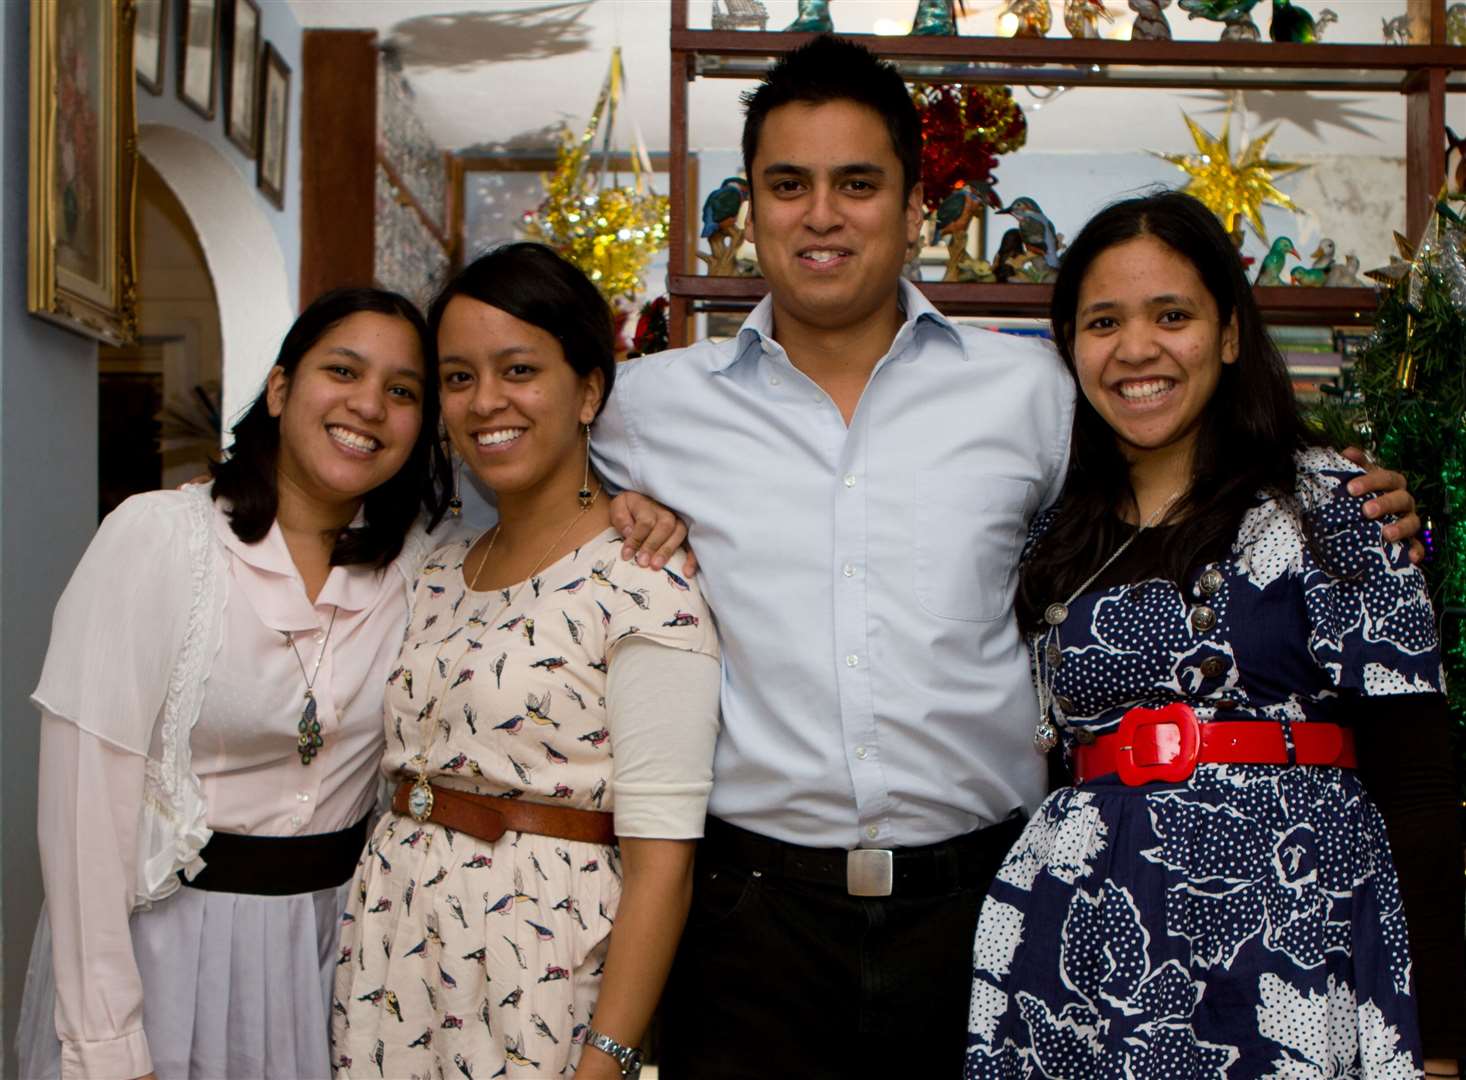 Ravi Ghowry with his sisters (left to right) Asha, Lhara and Seeta